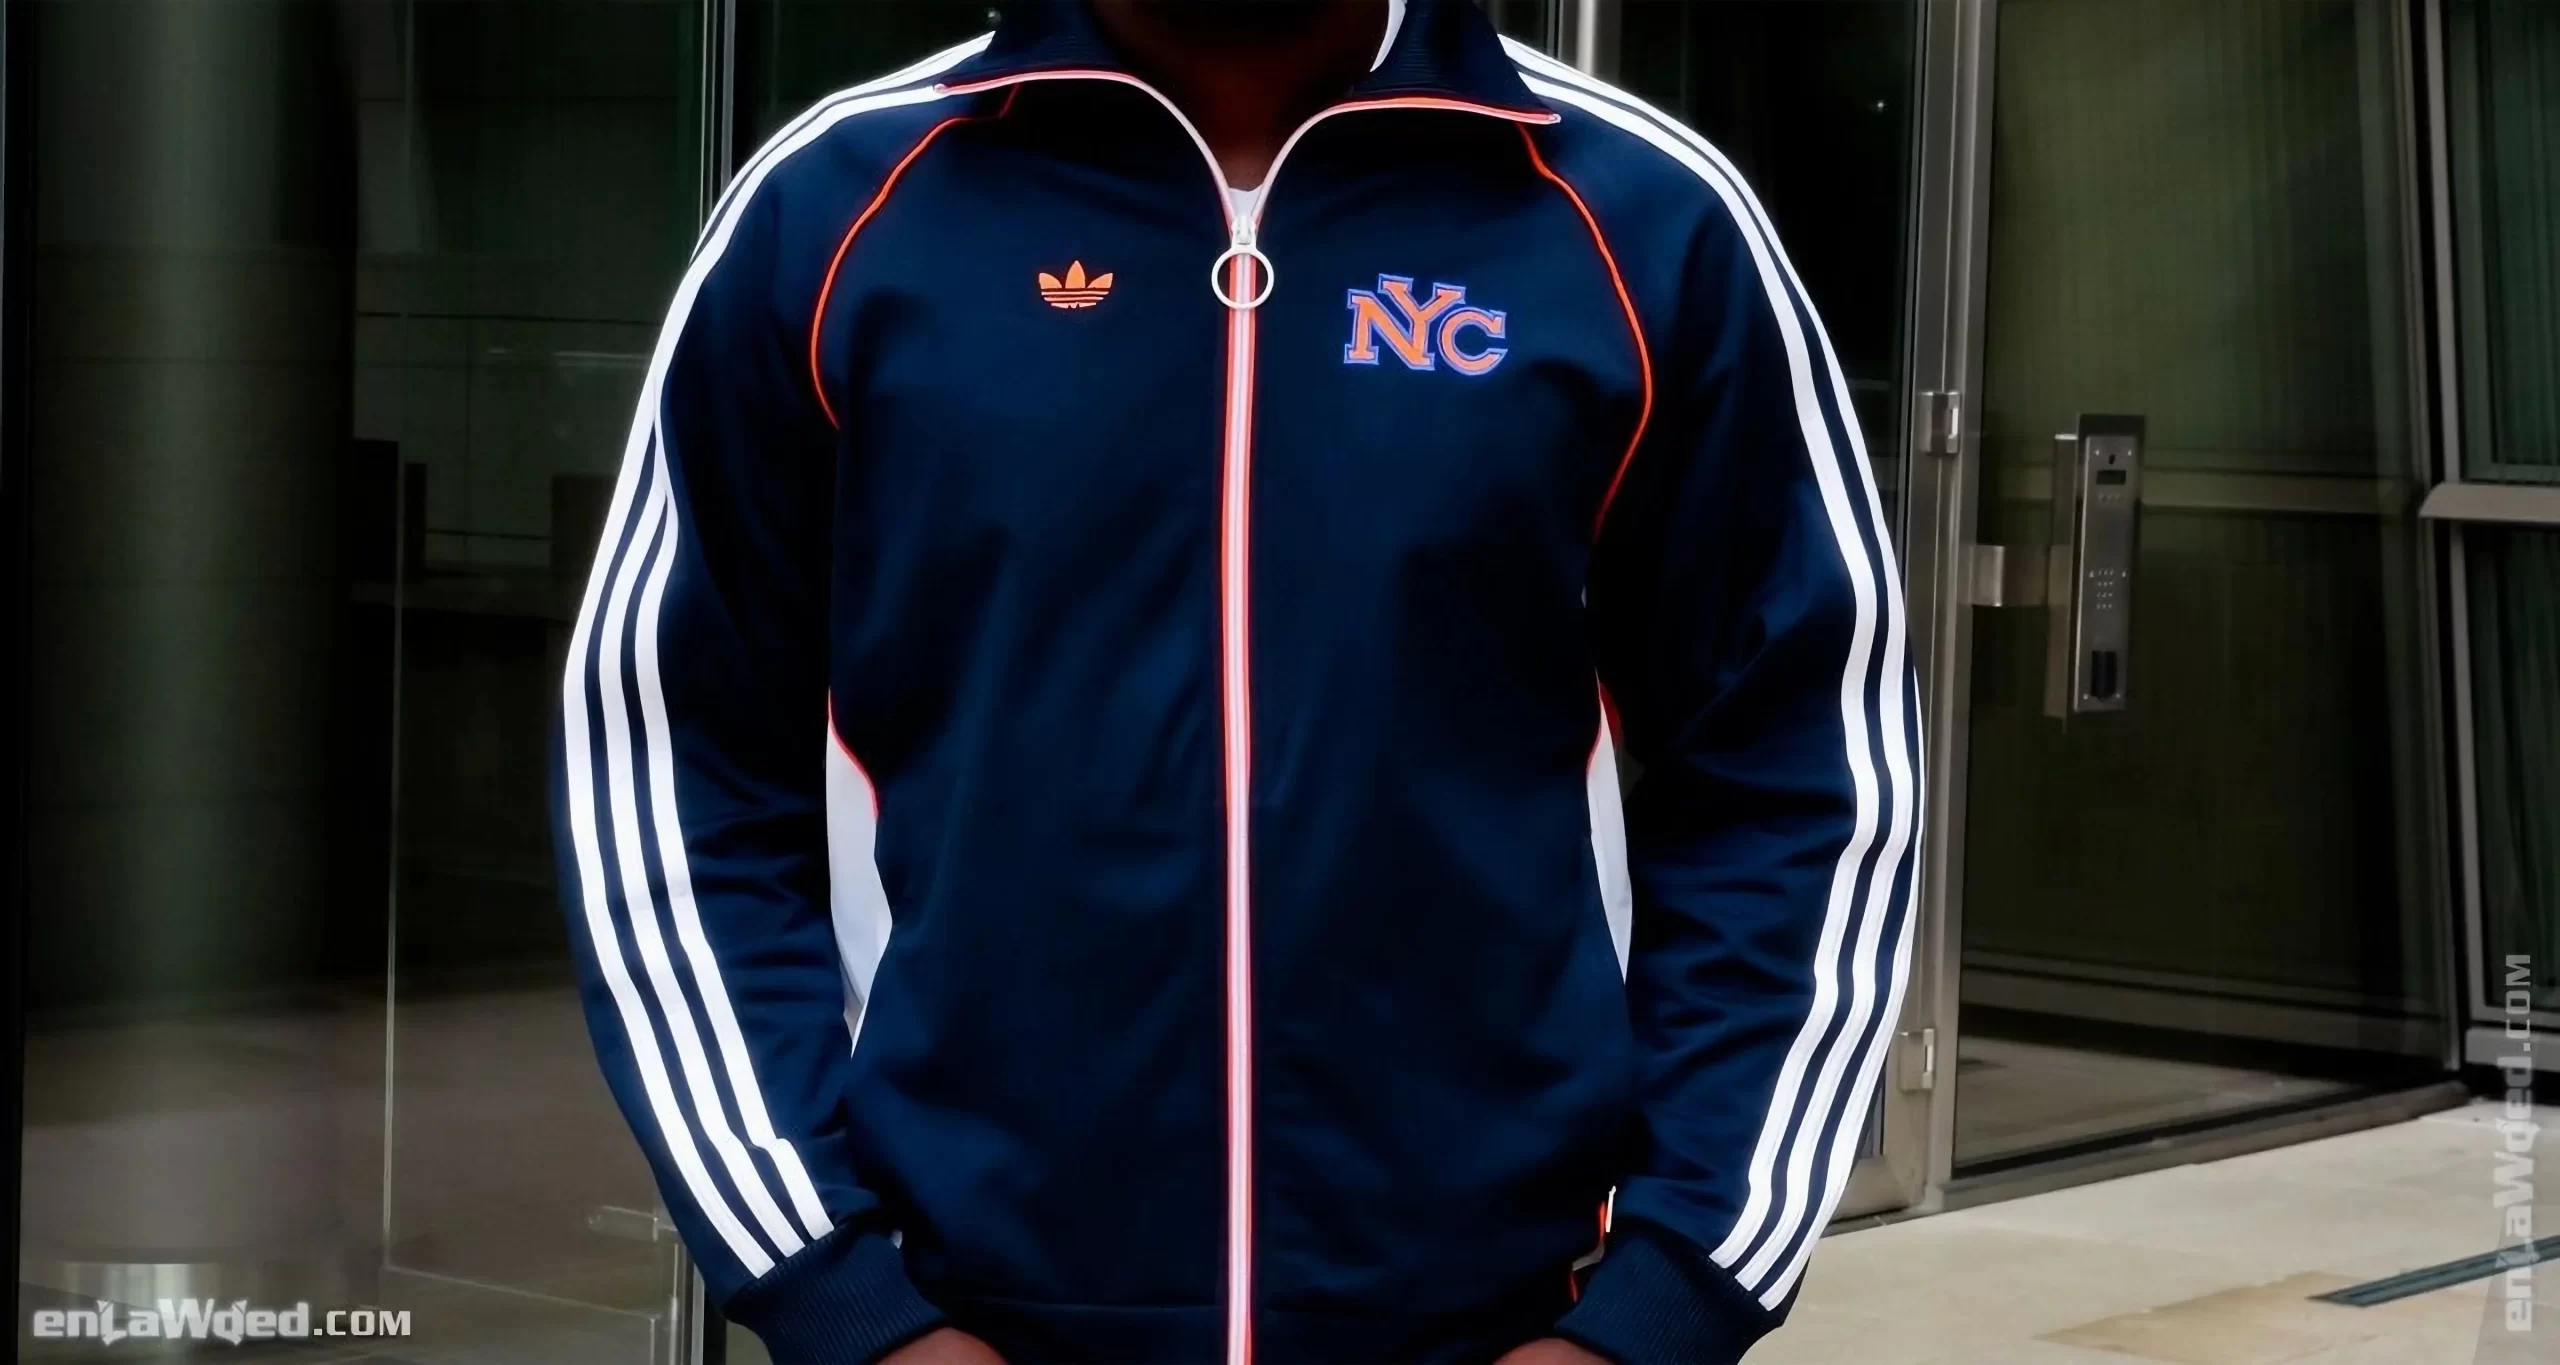 Men’s 2006 New York City Track Top by Adidas Originals: Backed (EnLawded.com file #lmchk90417ip2y123177kg9st)